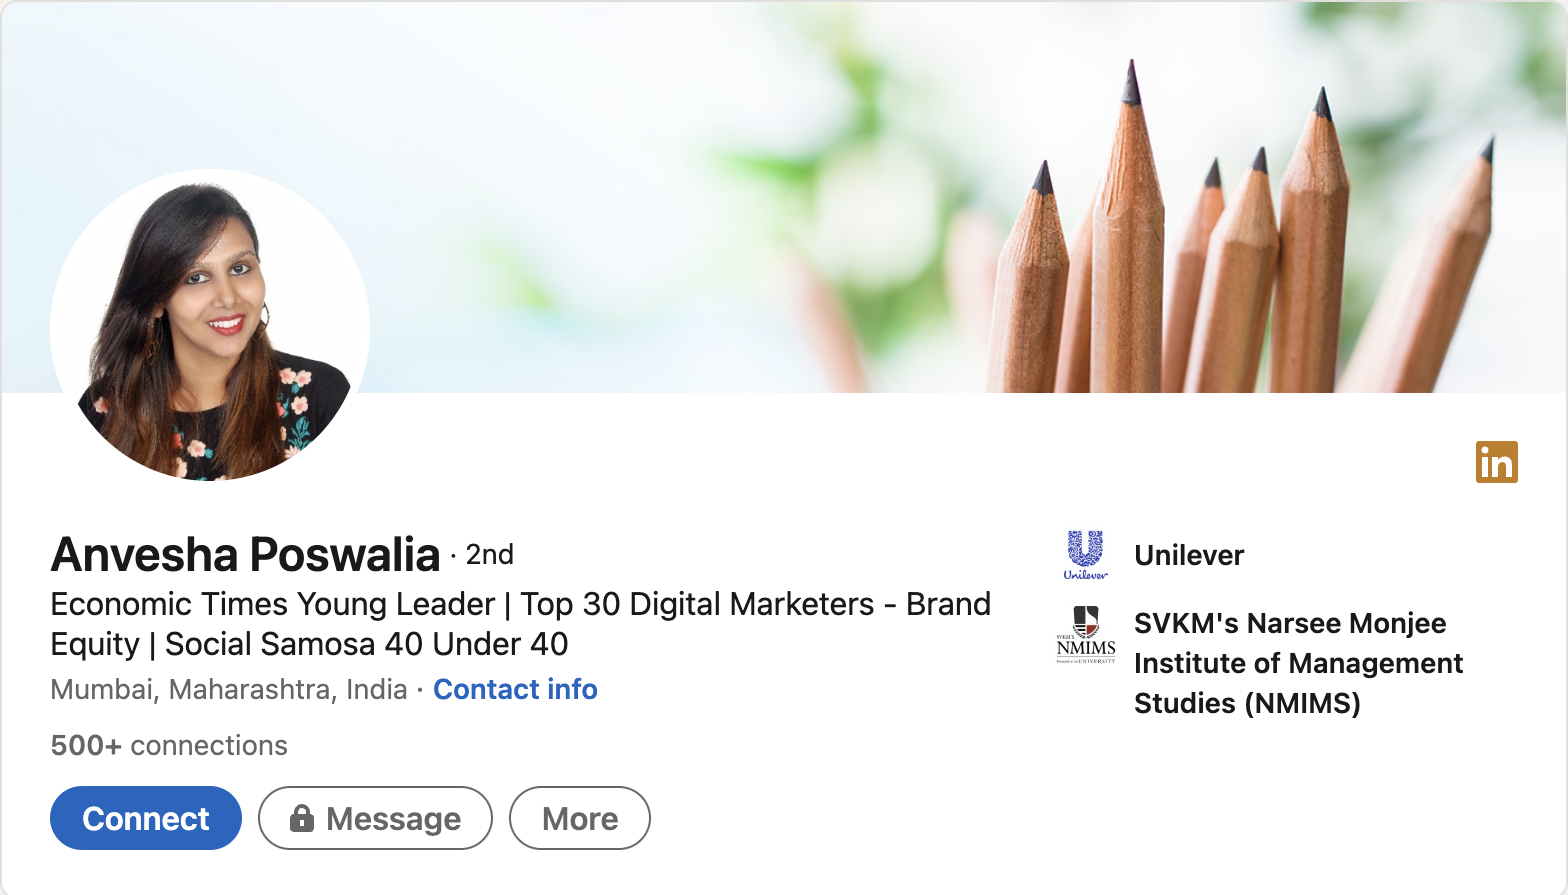 8 Most Popular Digital Marketing Bloggers/Influencers in India (Updated 2022)